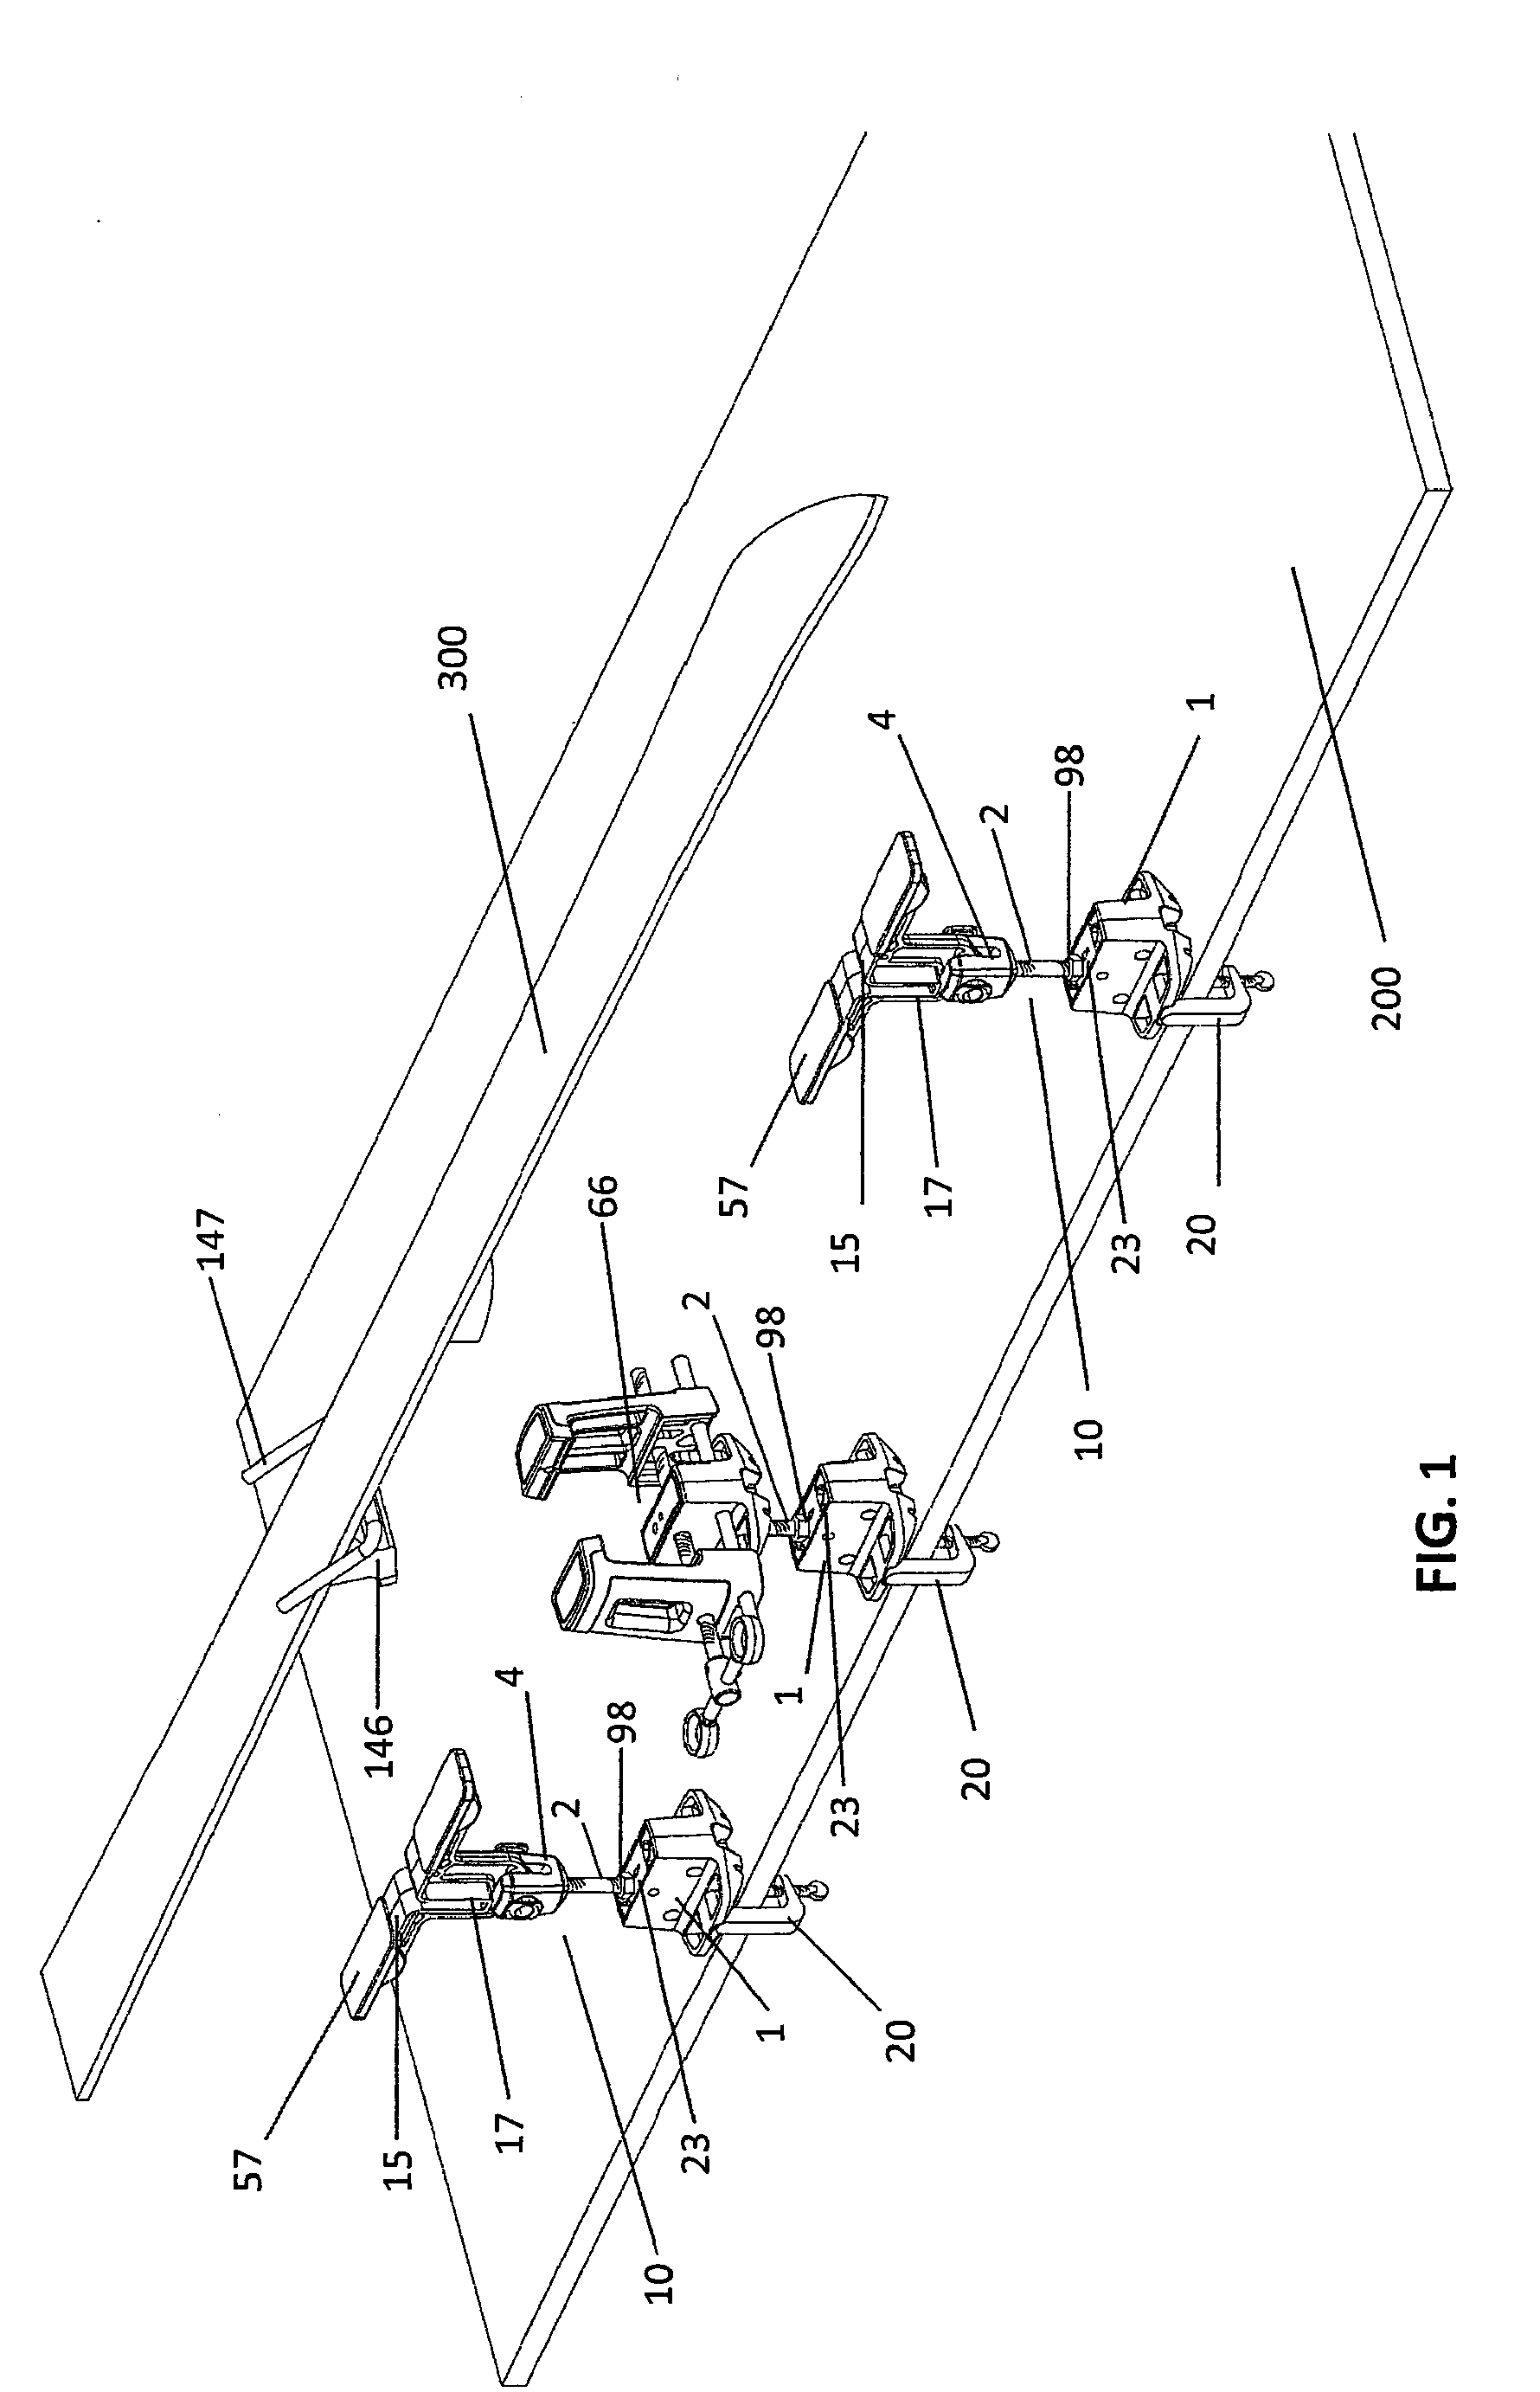 Sports equipment holding device